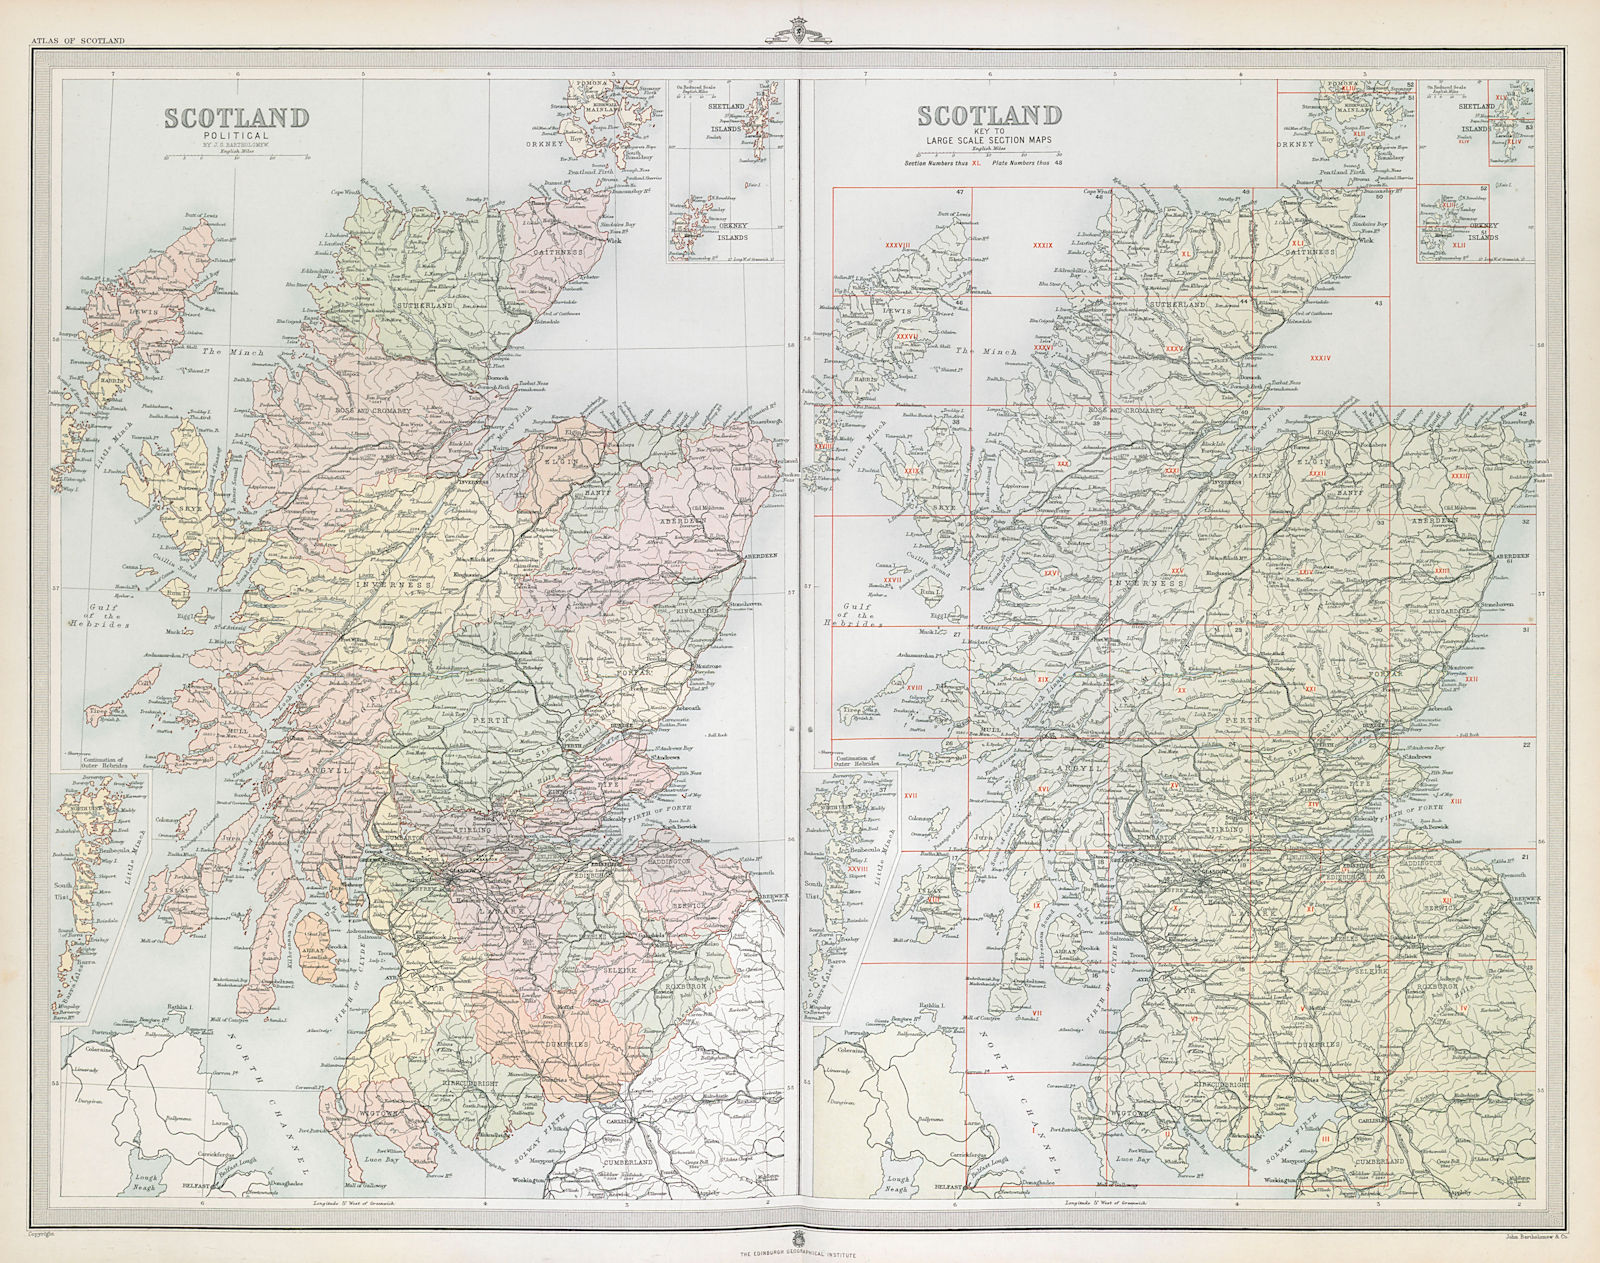 SCOTLAND Political. Counties. Key to large scale section maps. LARGE 1895